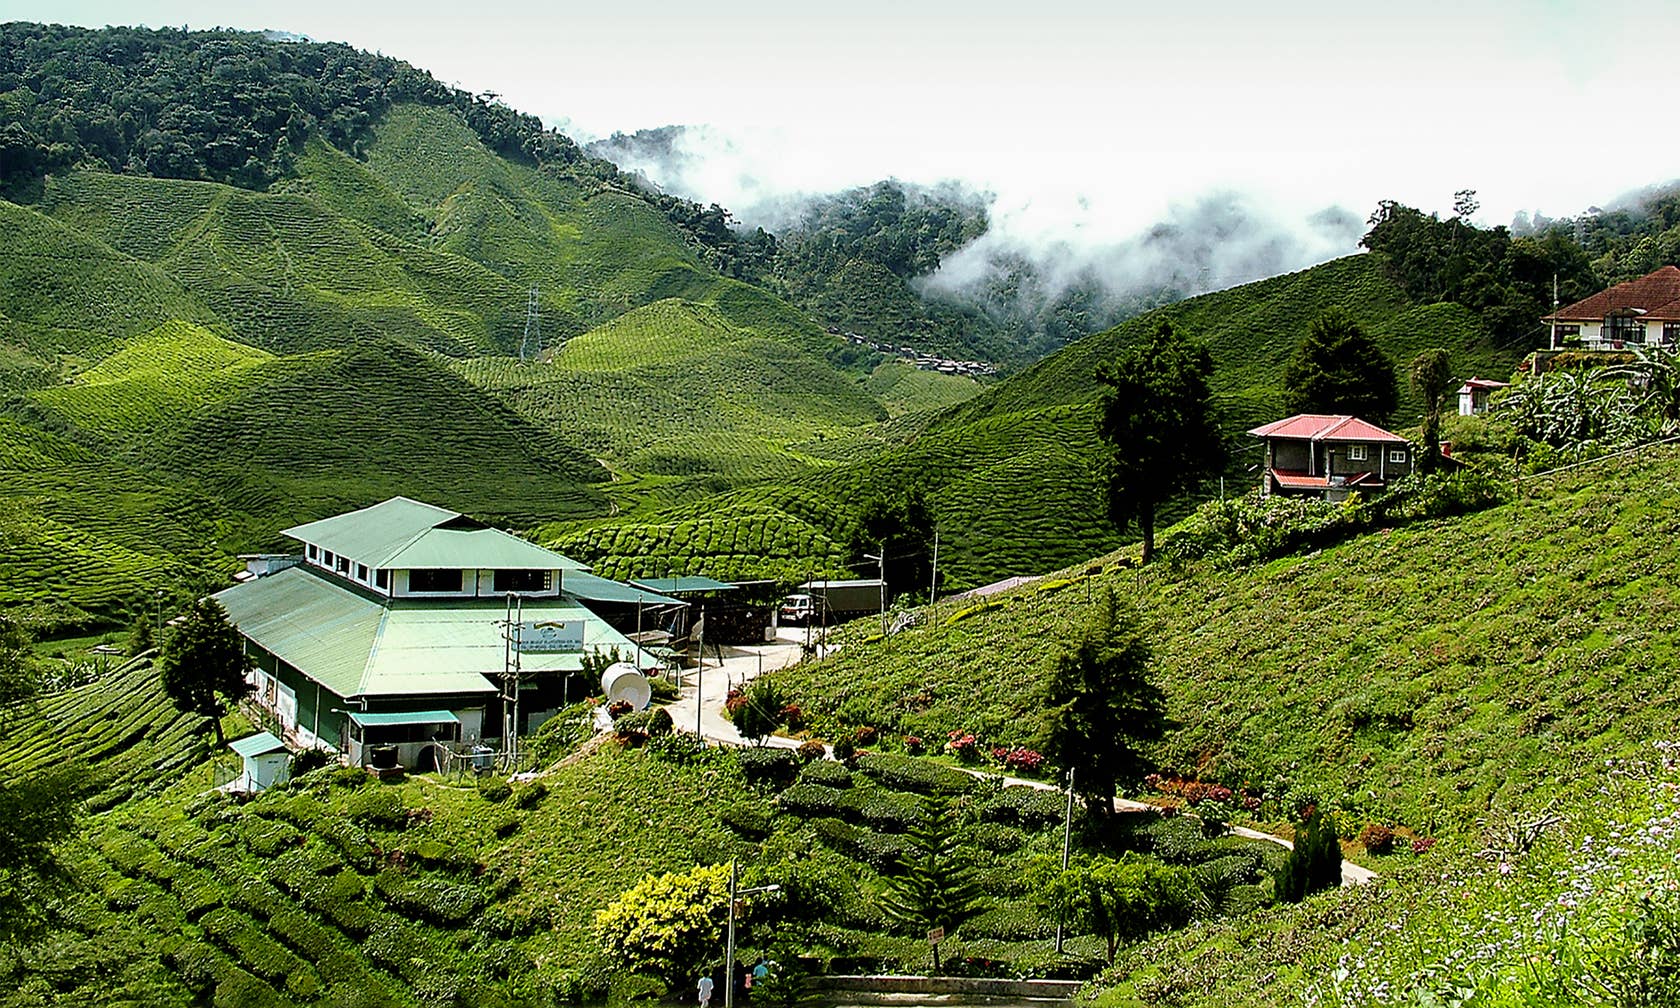 Holiday rentals in Cameron Highlands